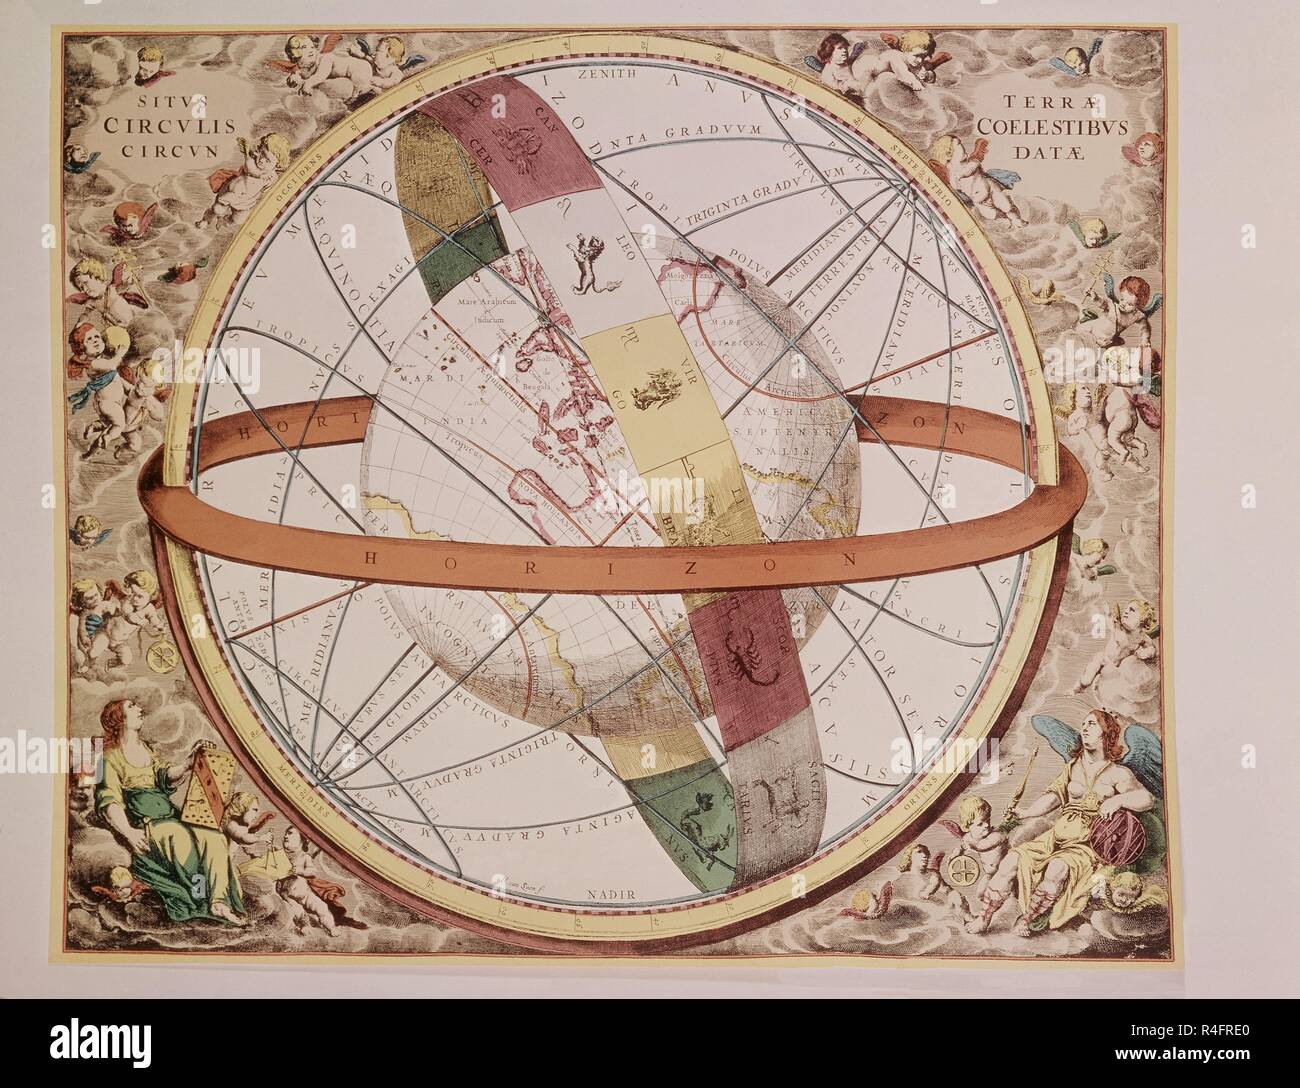 17th century astronomy hi-res stock photography and images image